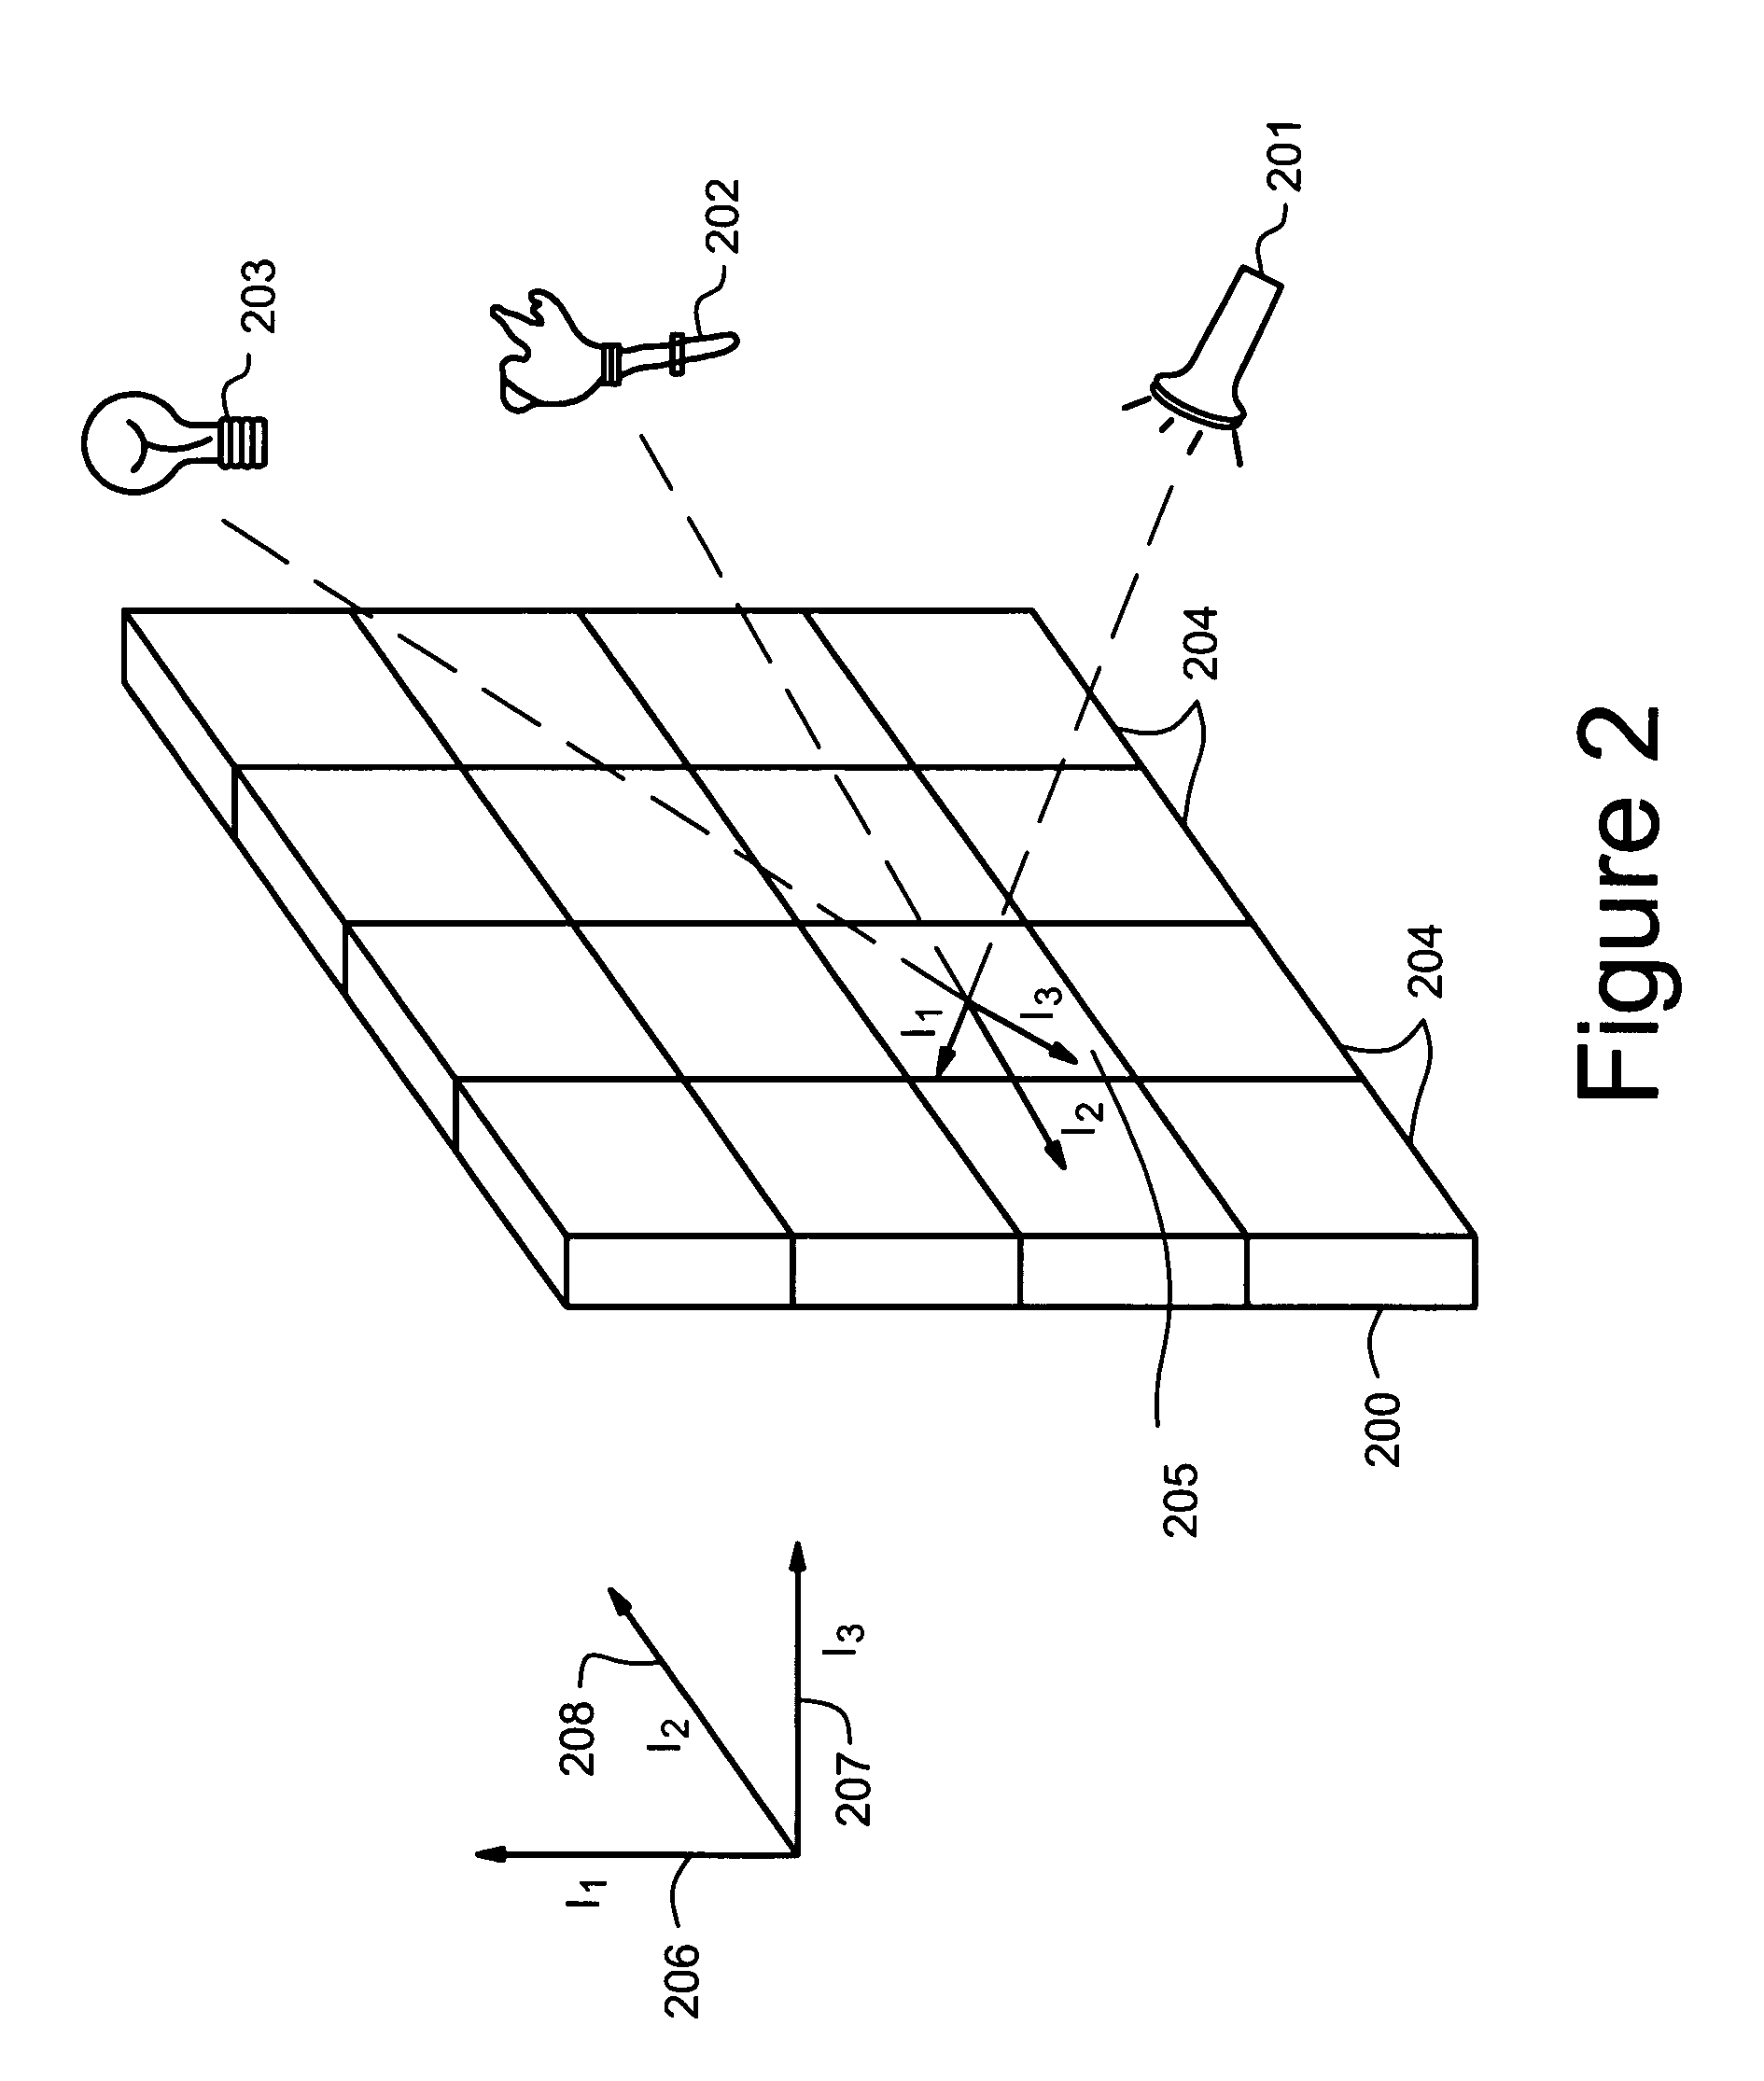 System and method for displaying the effects of light illumination on a surface